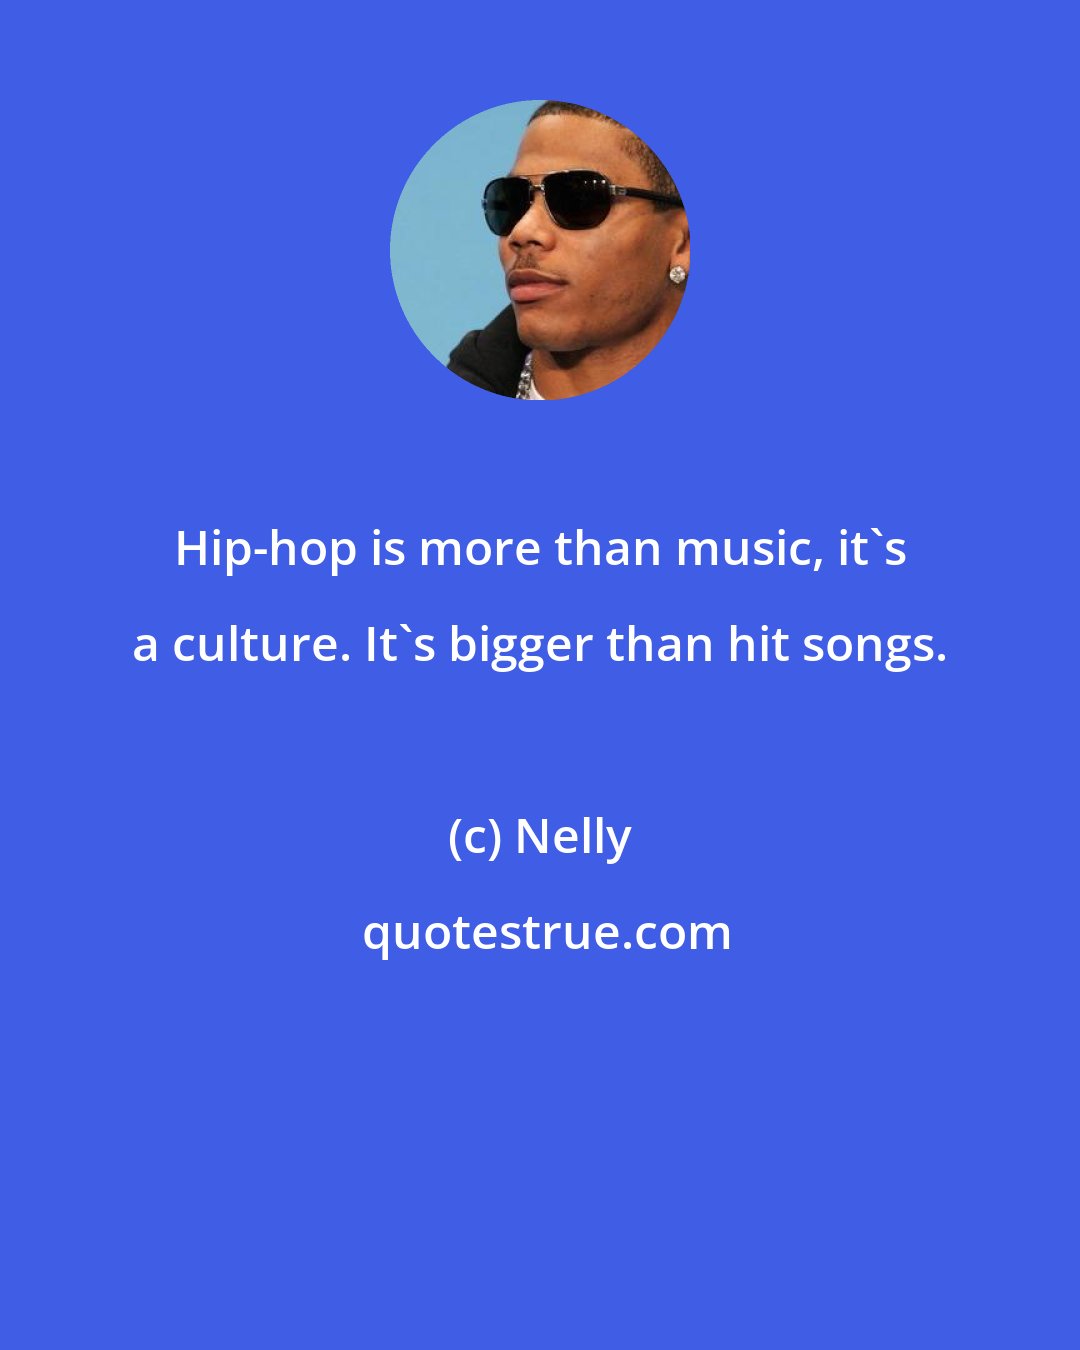 Nelly: Hip-hop is more than music, it's a culture. It's bigger than hit songs.